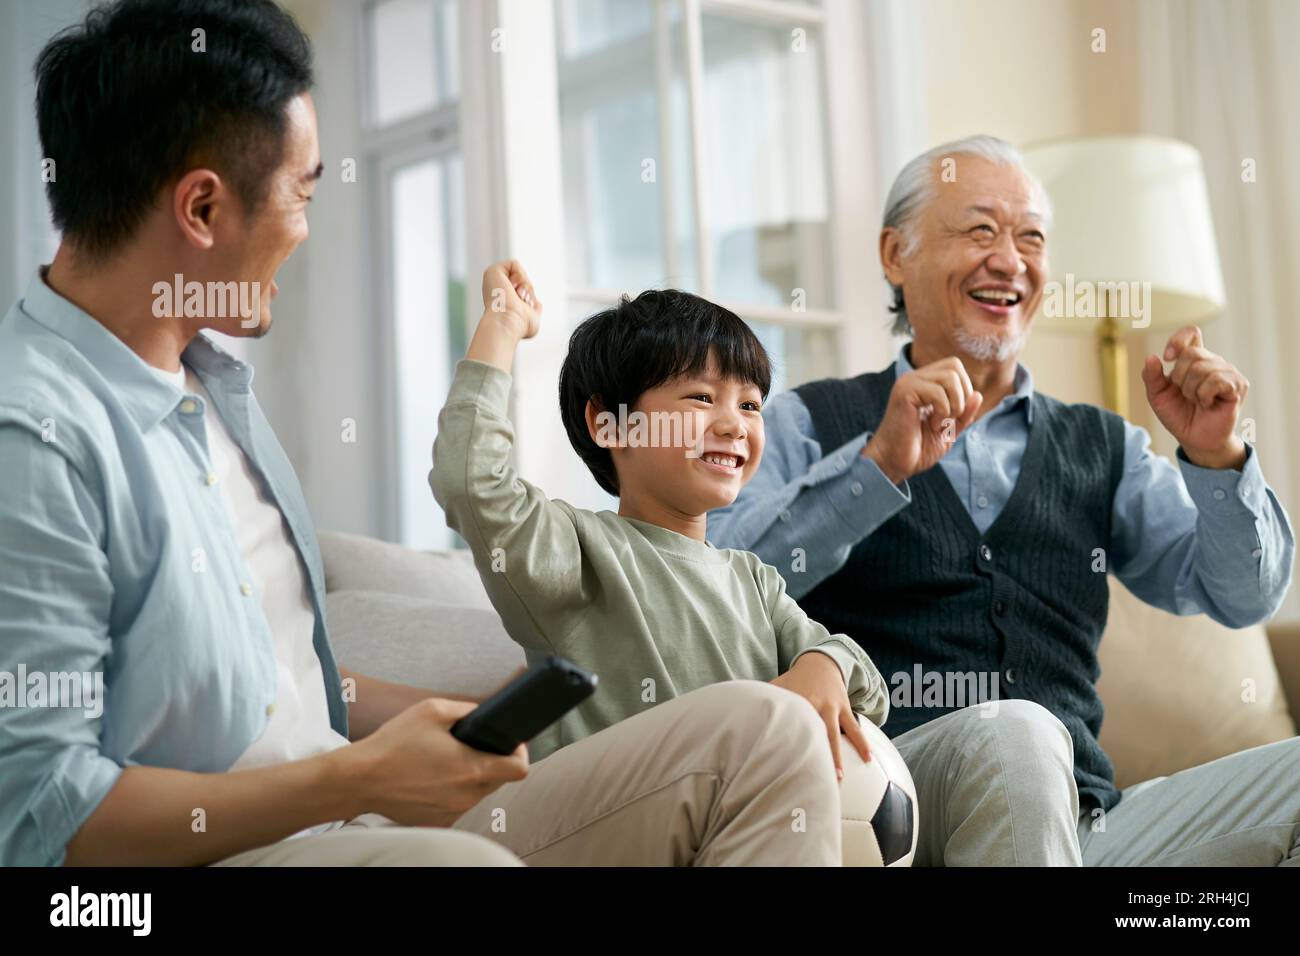 asian son father grandfather sitting on couch at home celebrating goal and victory while watching live broadcasting of football match on TV together Stock Photo